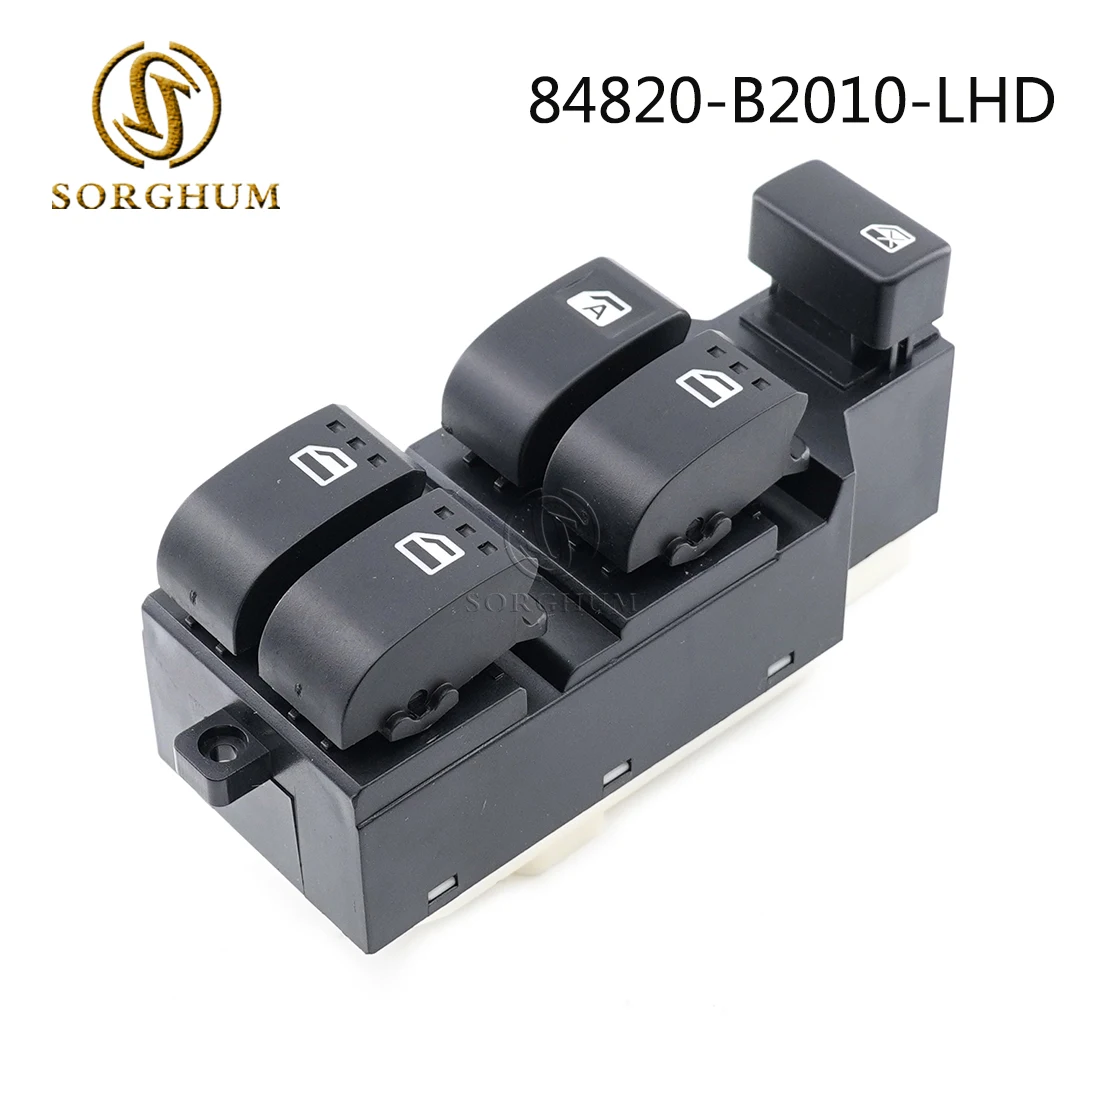 

Sorghum Power Window Master Control Switch Front Left Driver Side for Daihatsu Toyota Avanza BB - Replacement OE# 84820-B2010